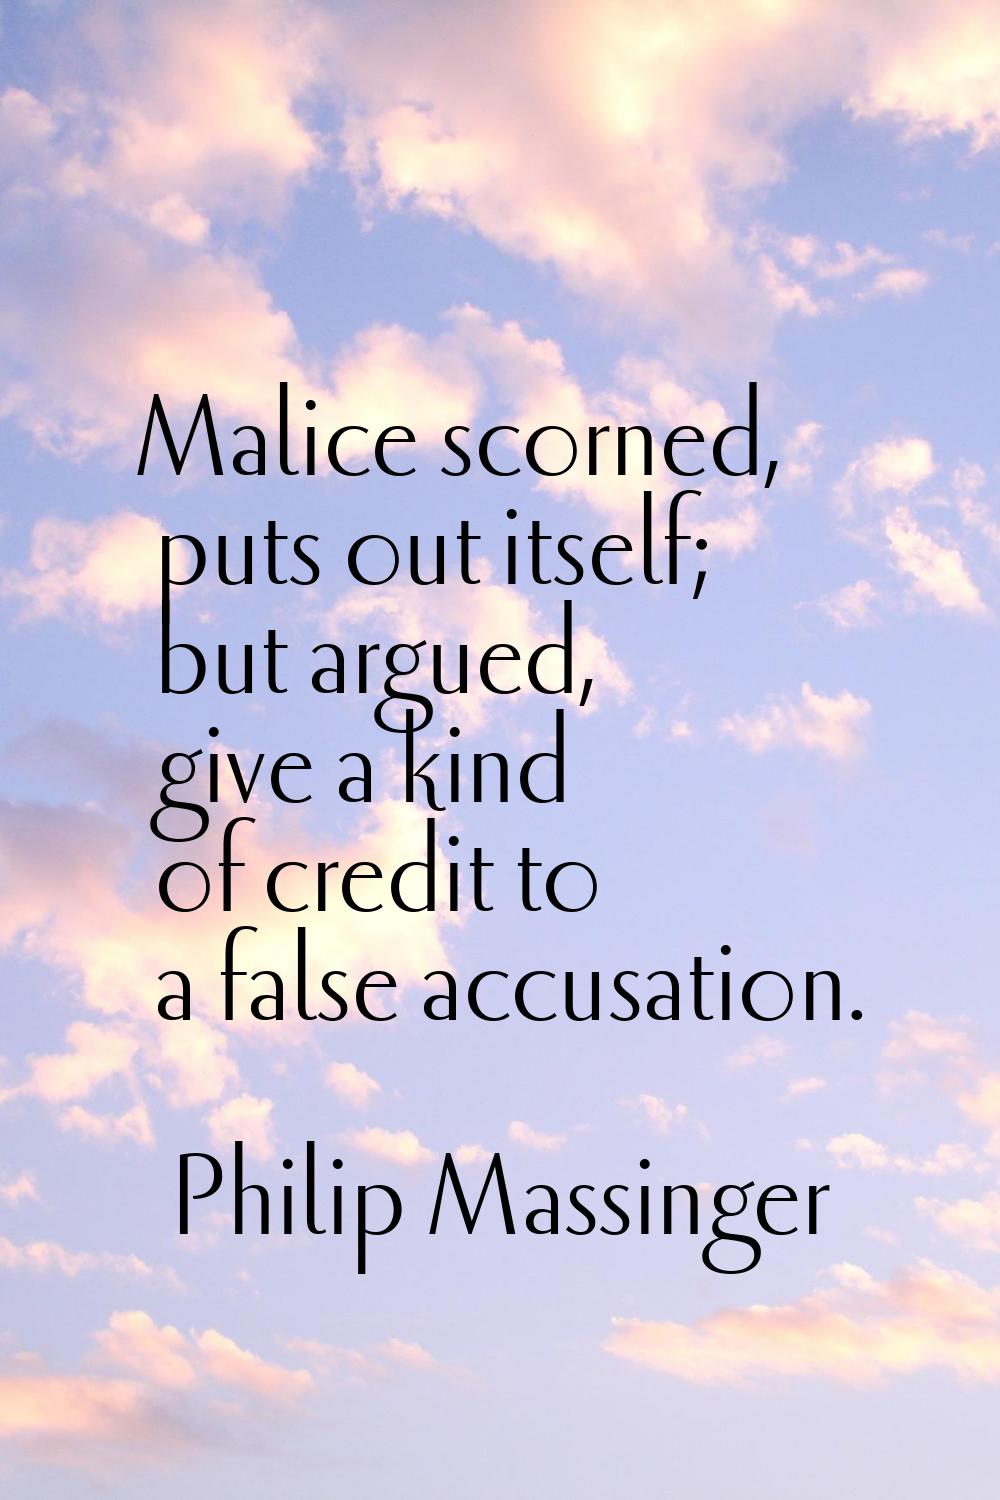 Malice scorned, puts out itself; but argued, give a kind of credit to a false accusation.